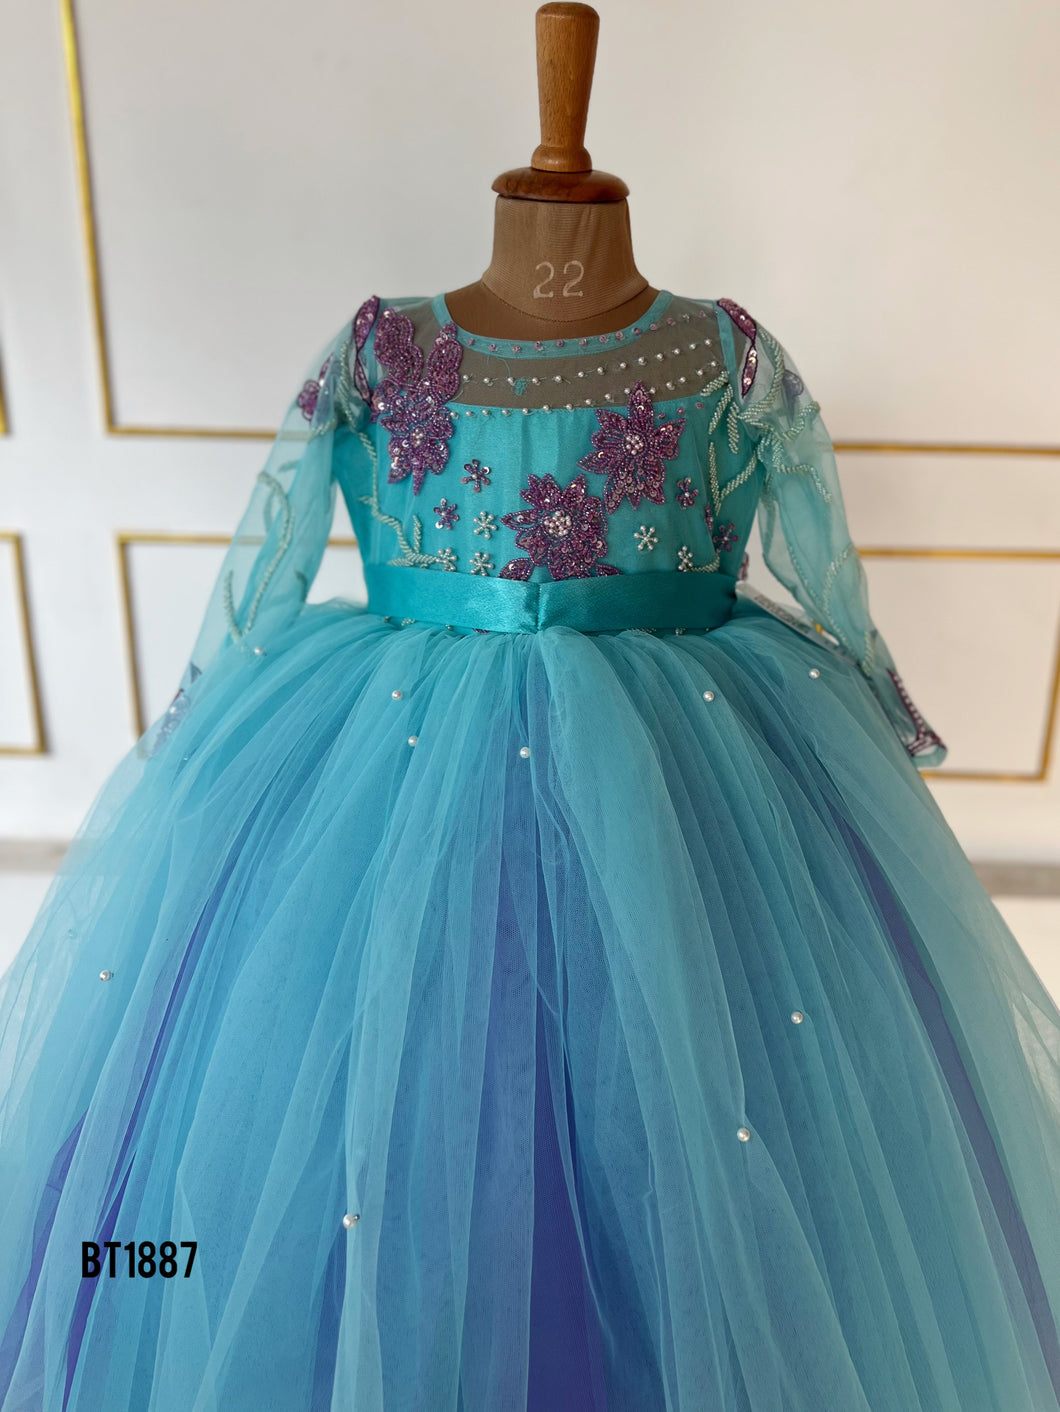 BT1887 Enchanted Princess Party Gown